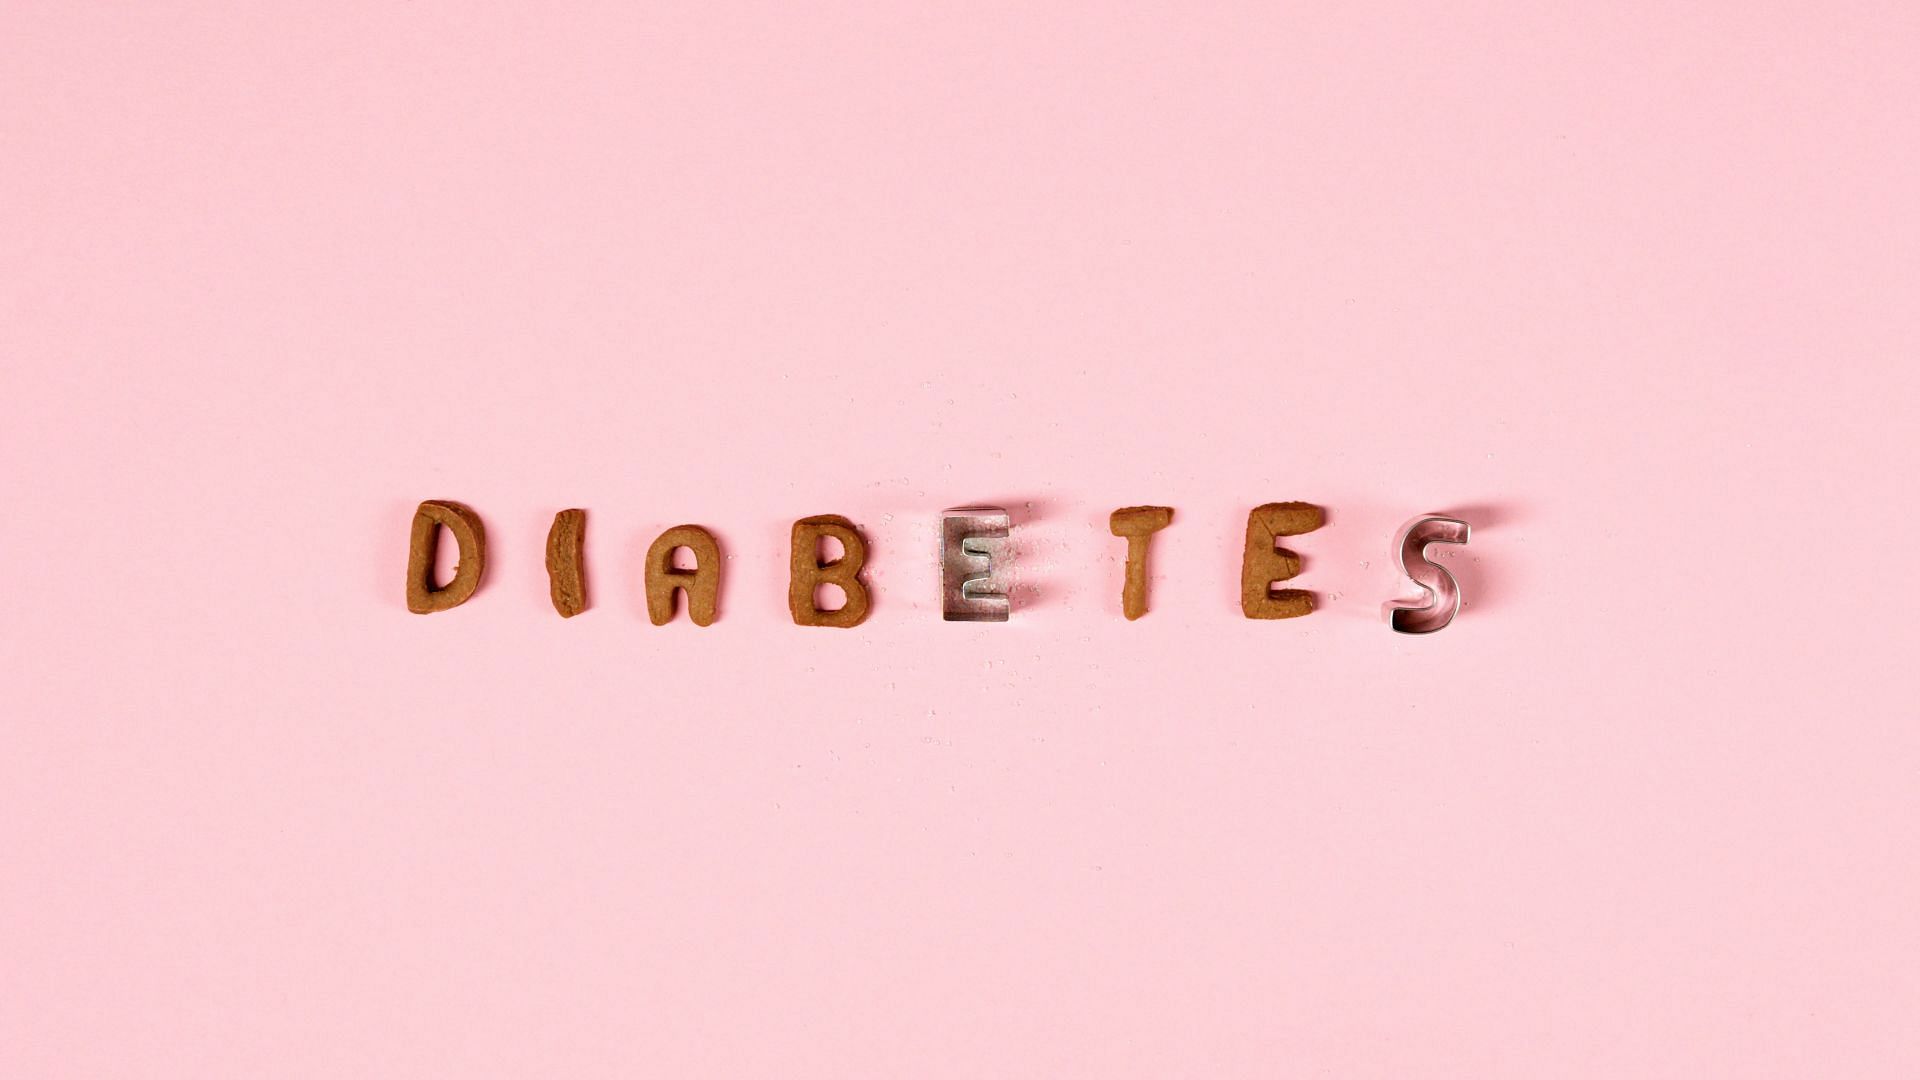 New research suggests that vitamin D may be able to keep diabetes at bay in pre-diabetic people (Image via Pexels @Artem Podrez)